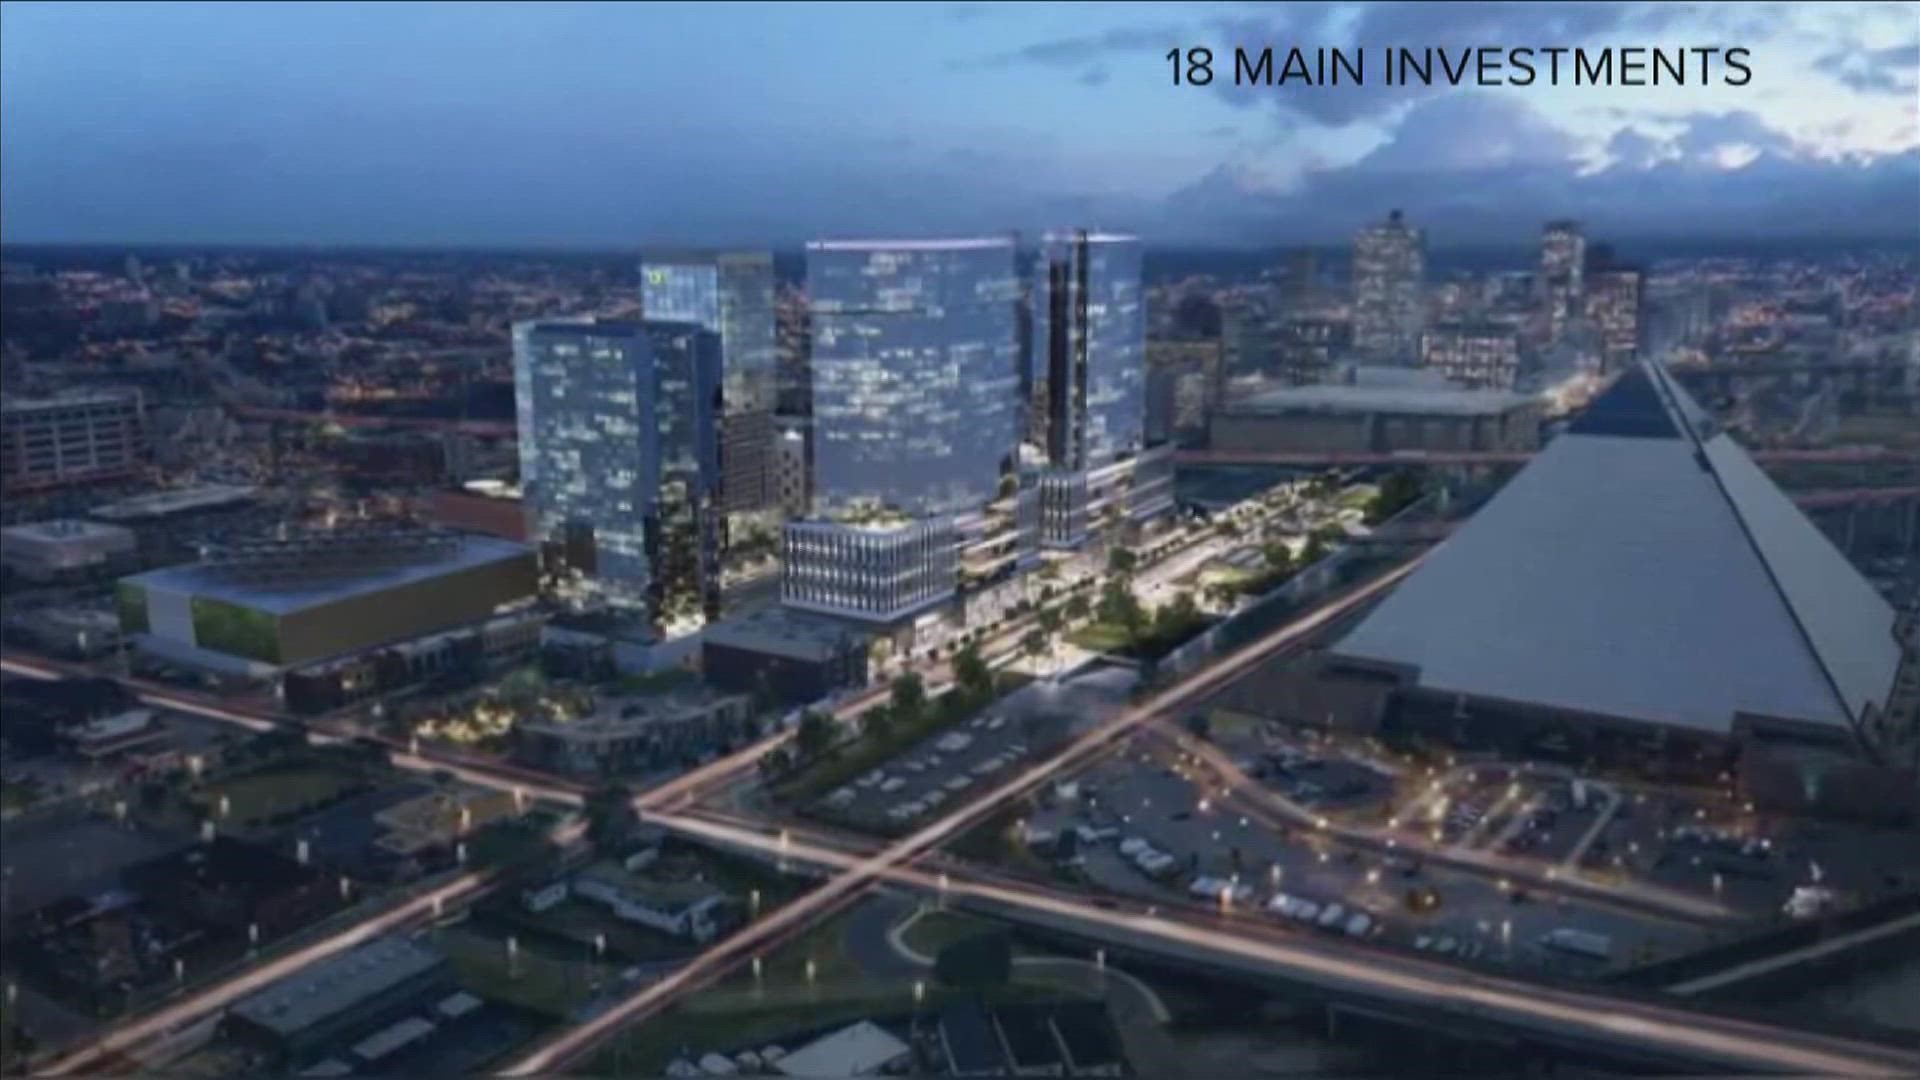 While downtown Memphis developments are at a standstill, none of the money is coming out of taxpayer dollars and the projects will make headway in about a year.